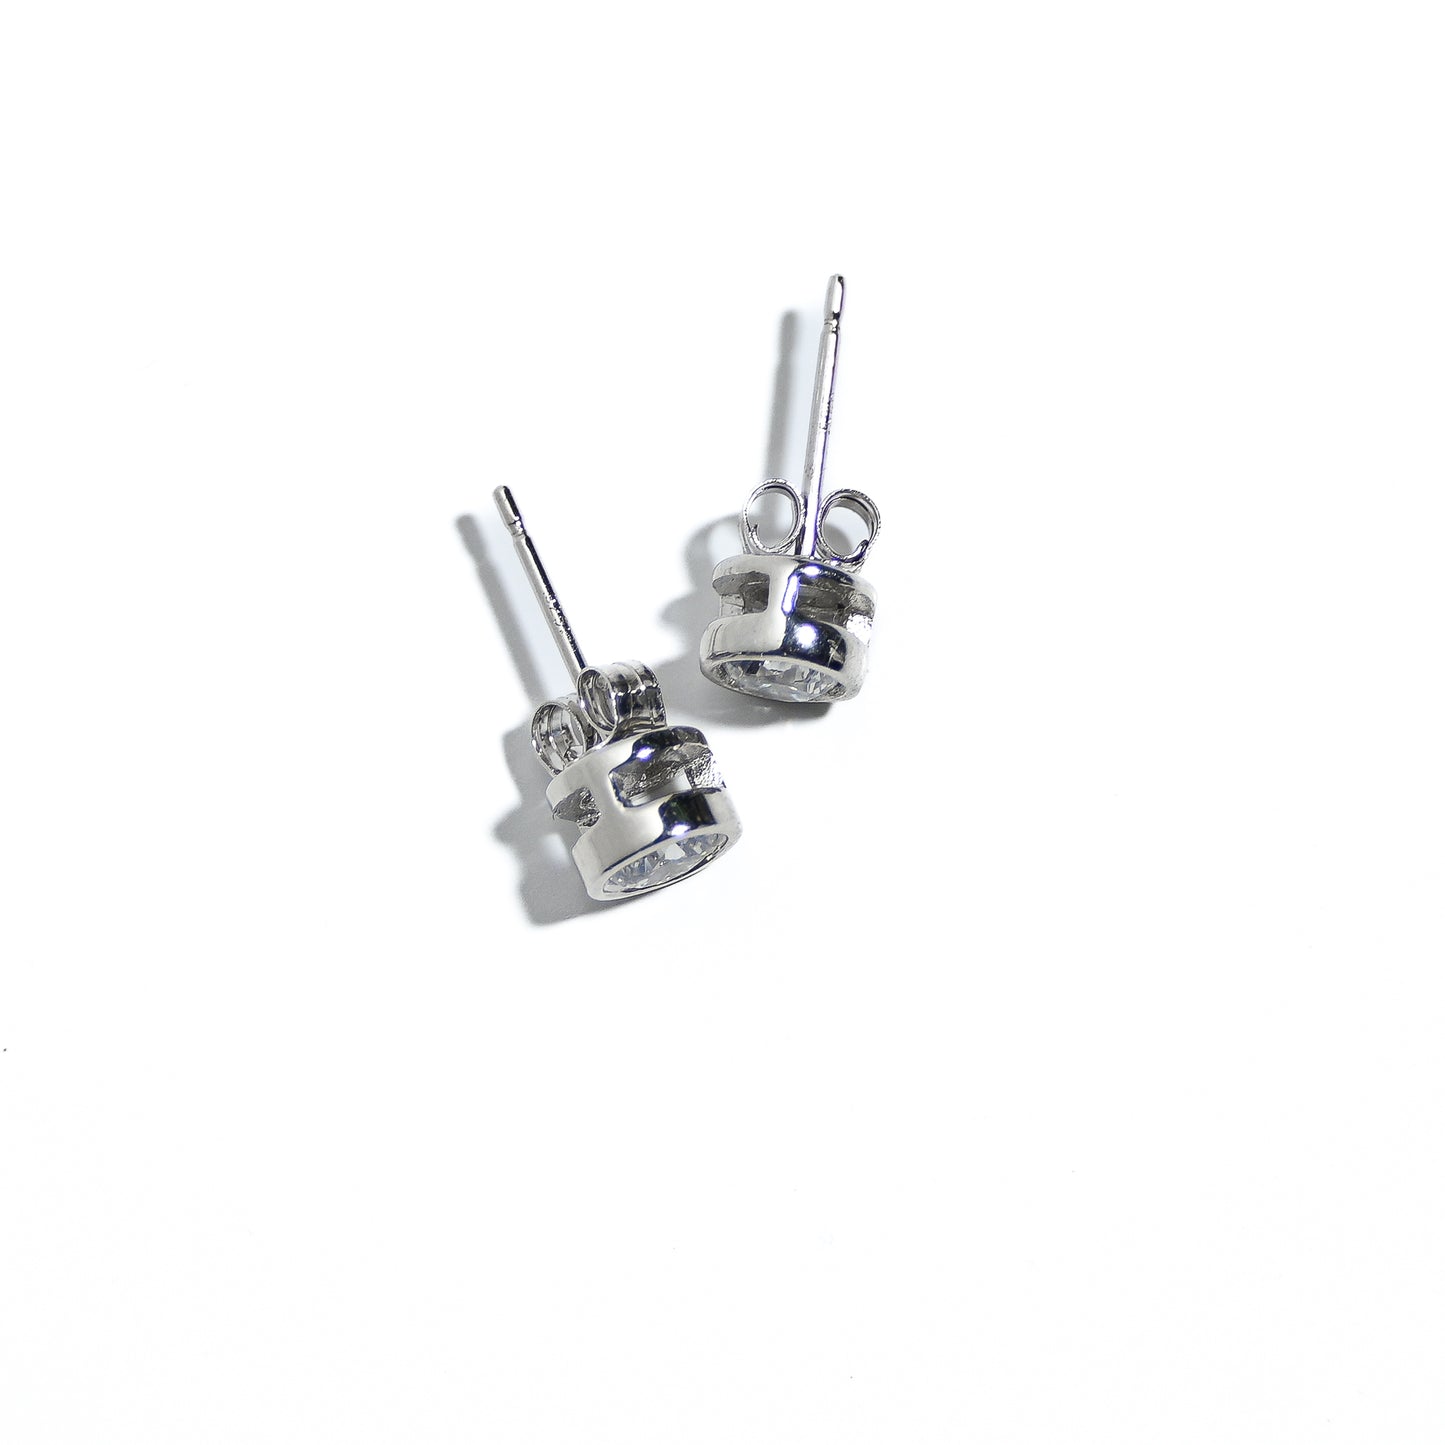 Sterling silwer stud with cubic zirconia